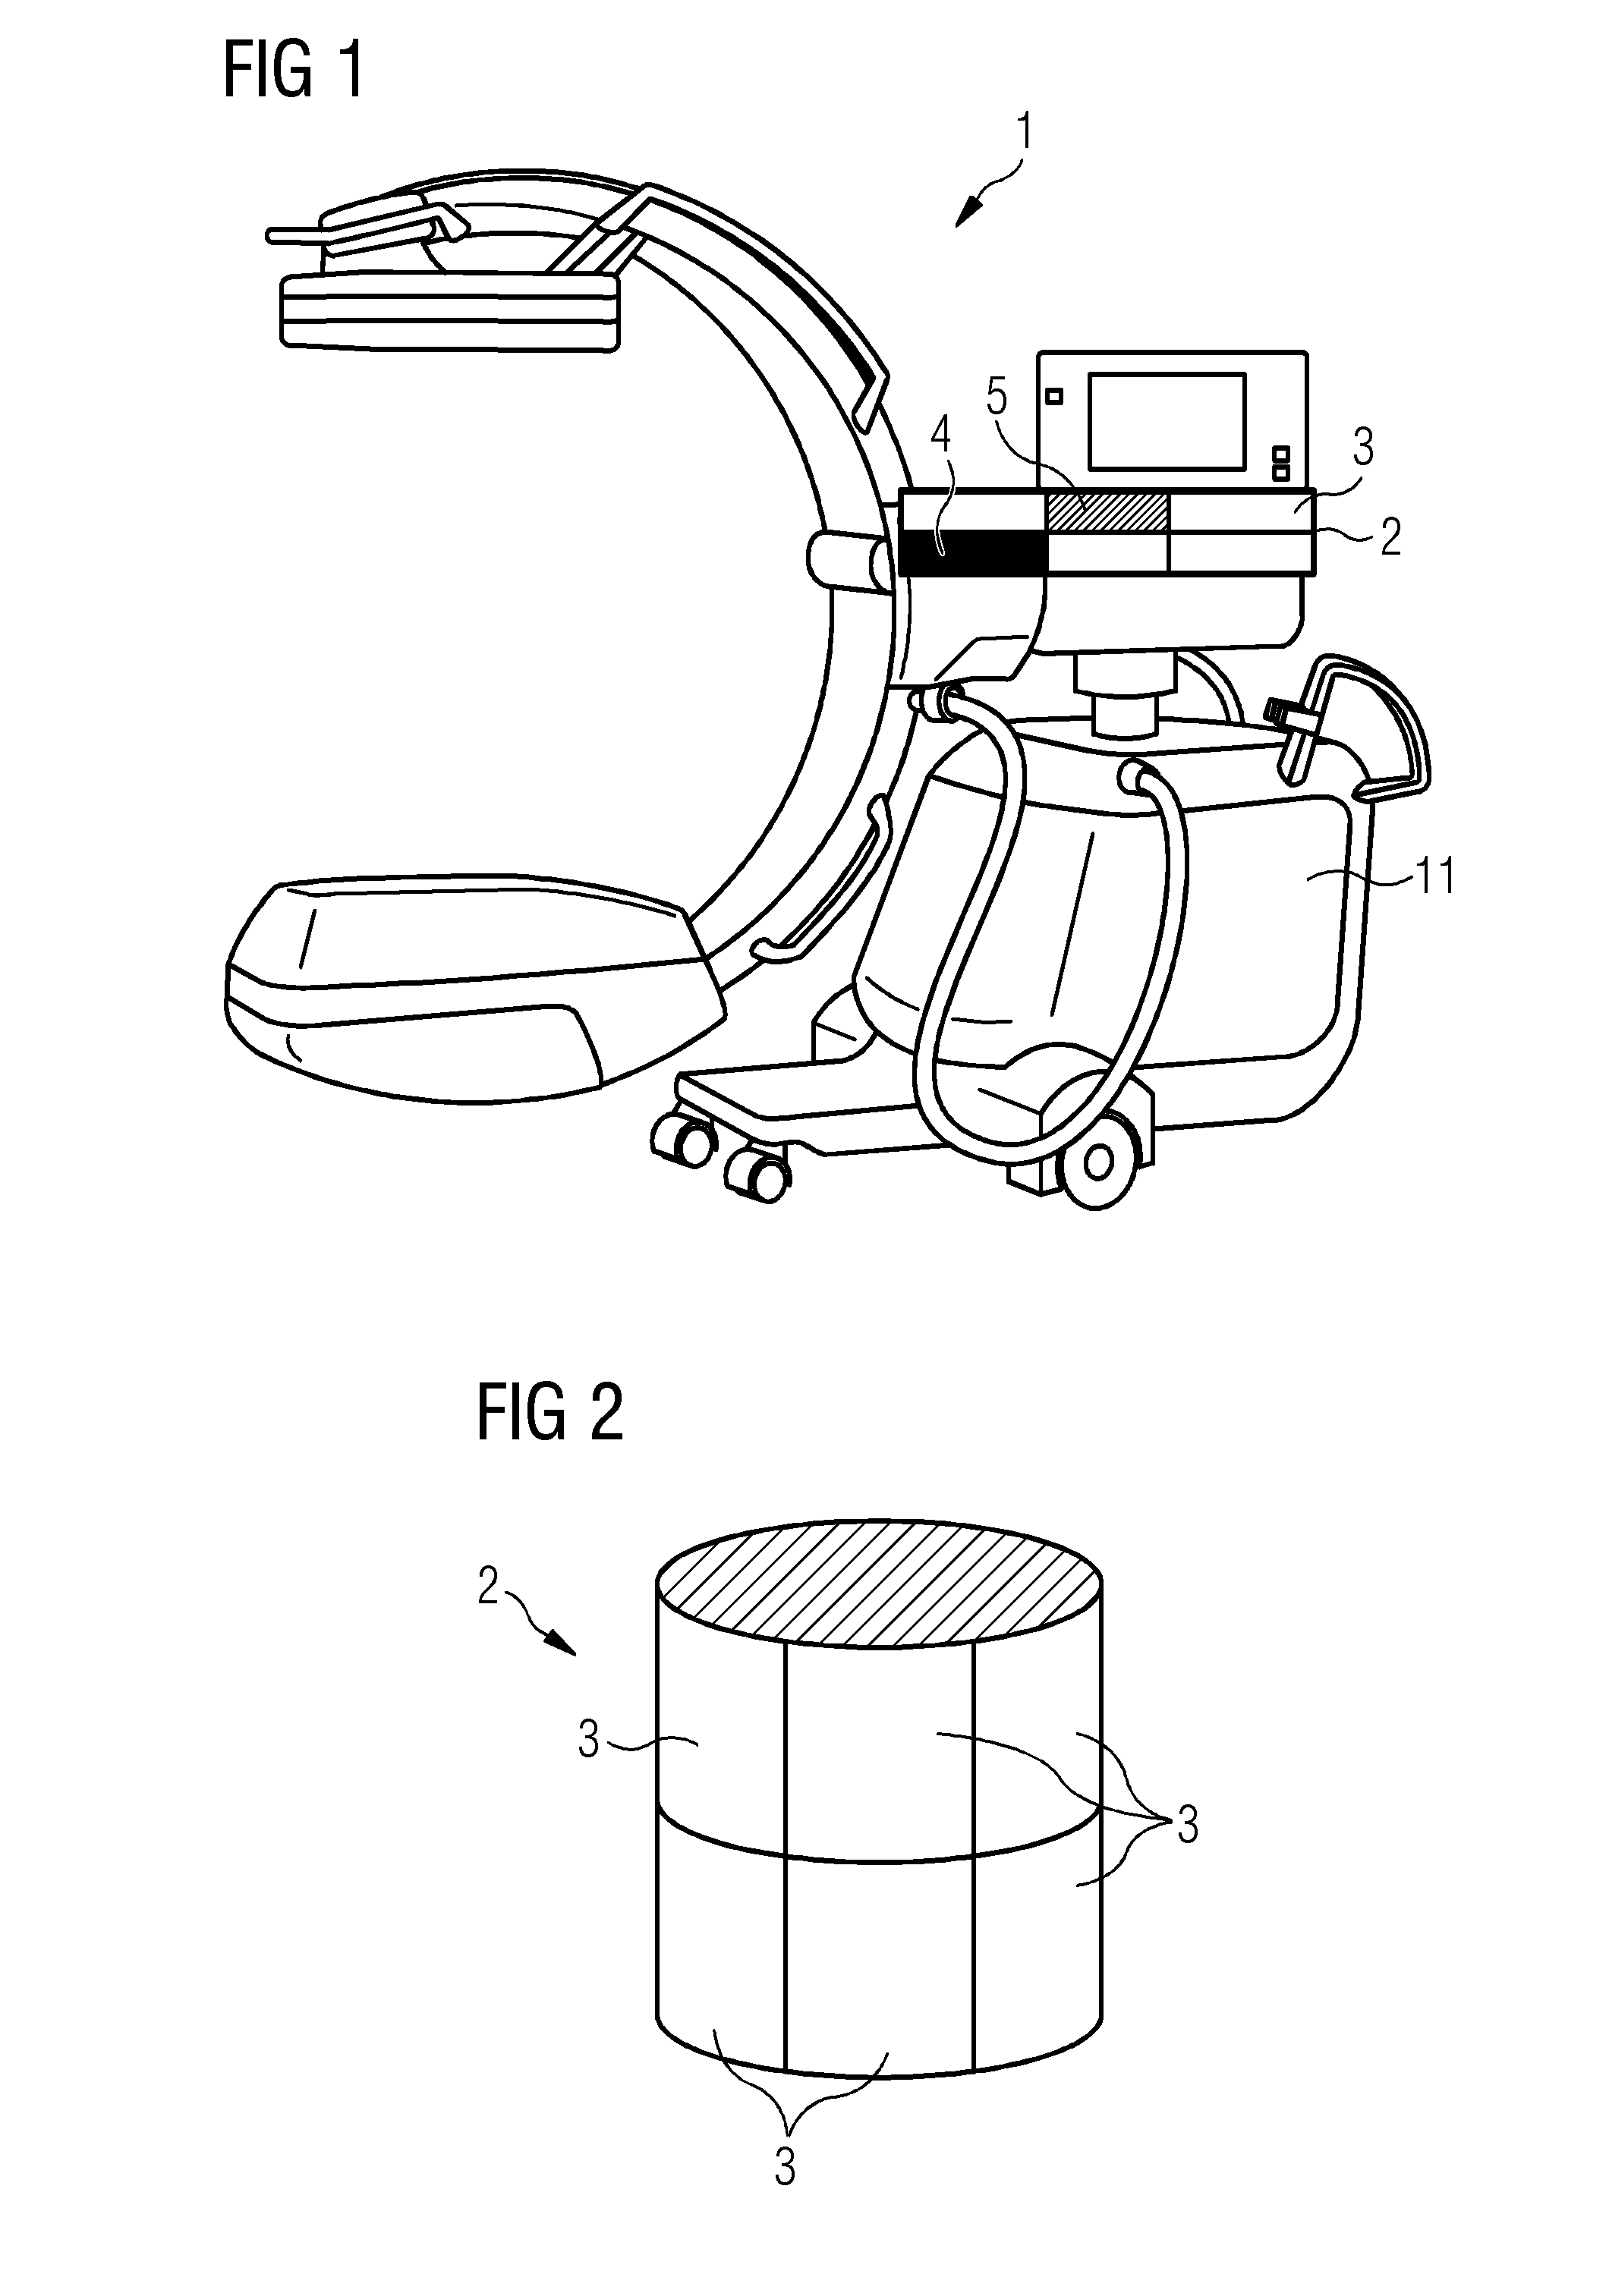 Motorized medical device and method for operating such a device